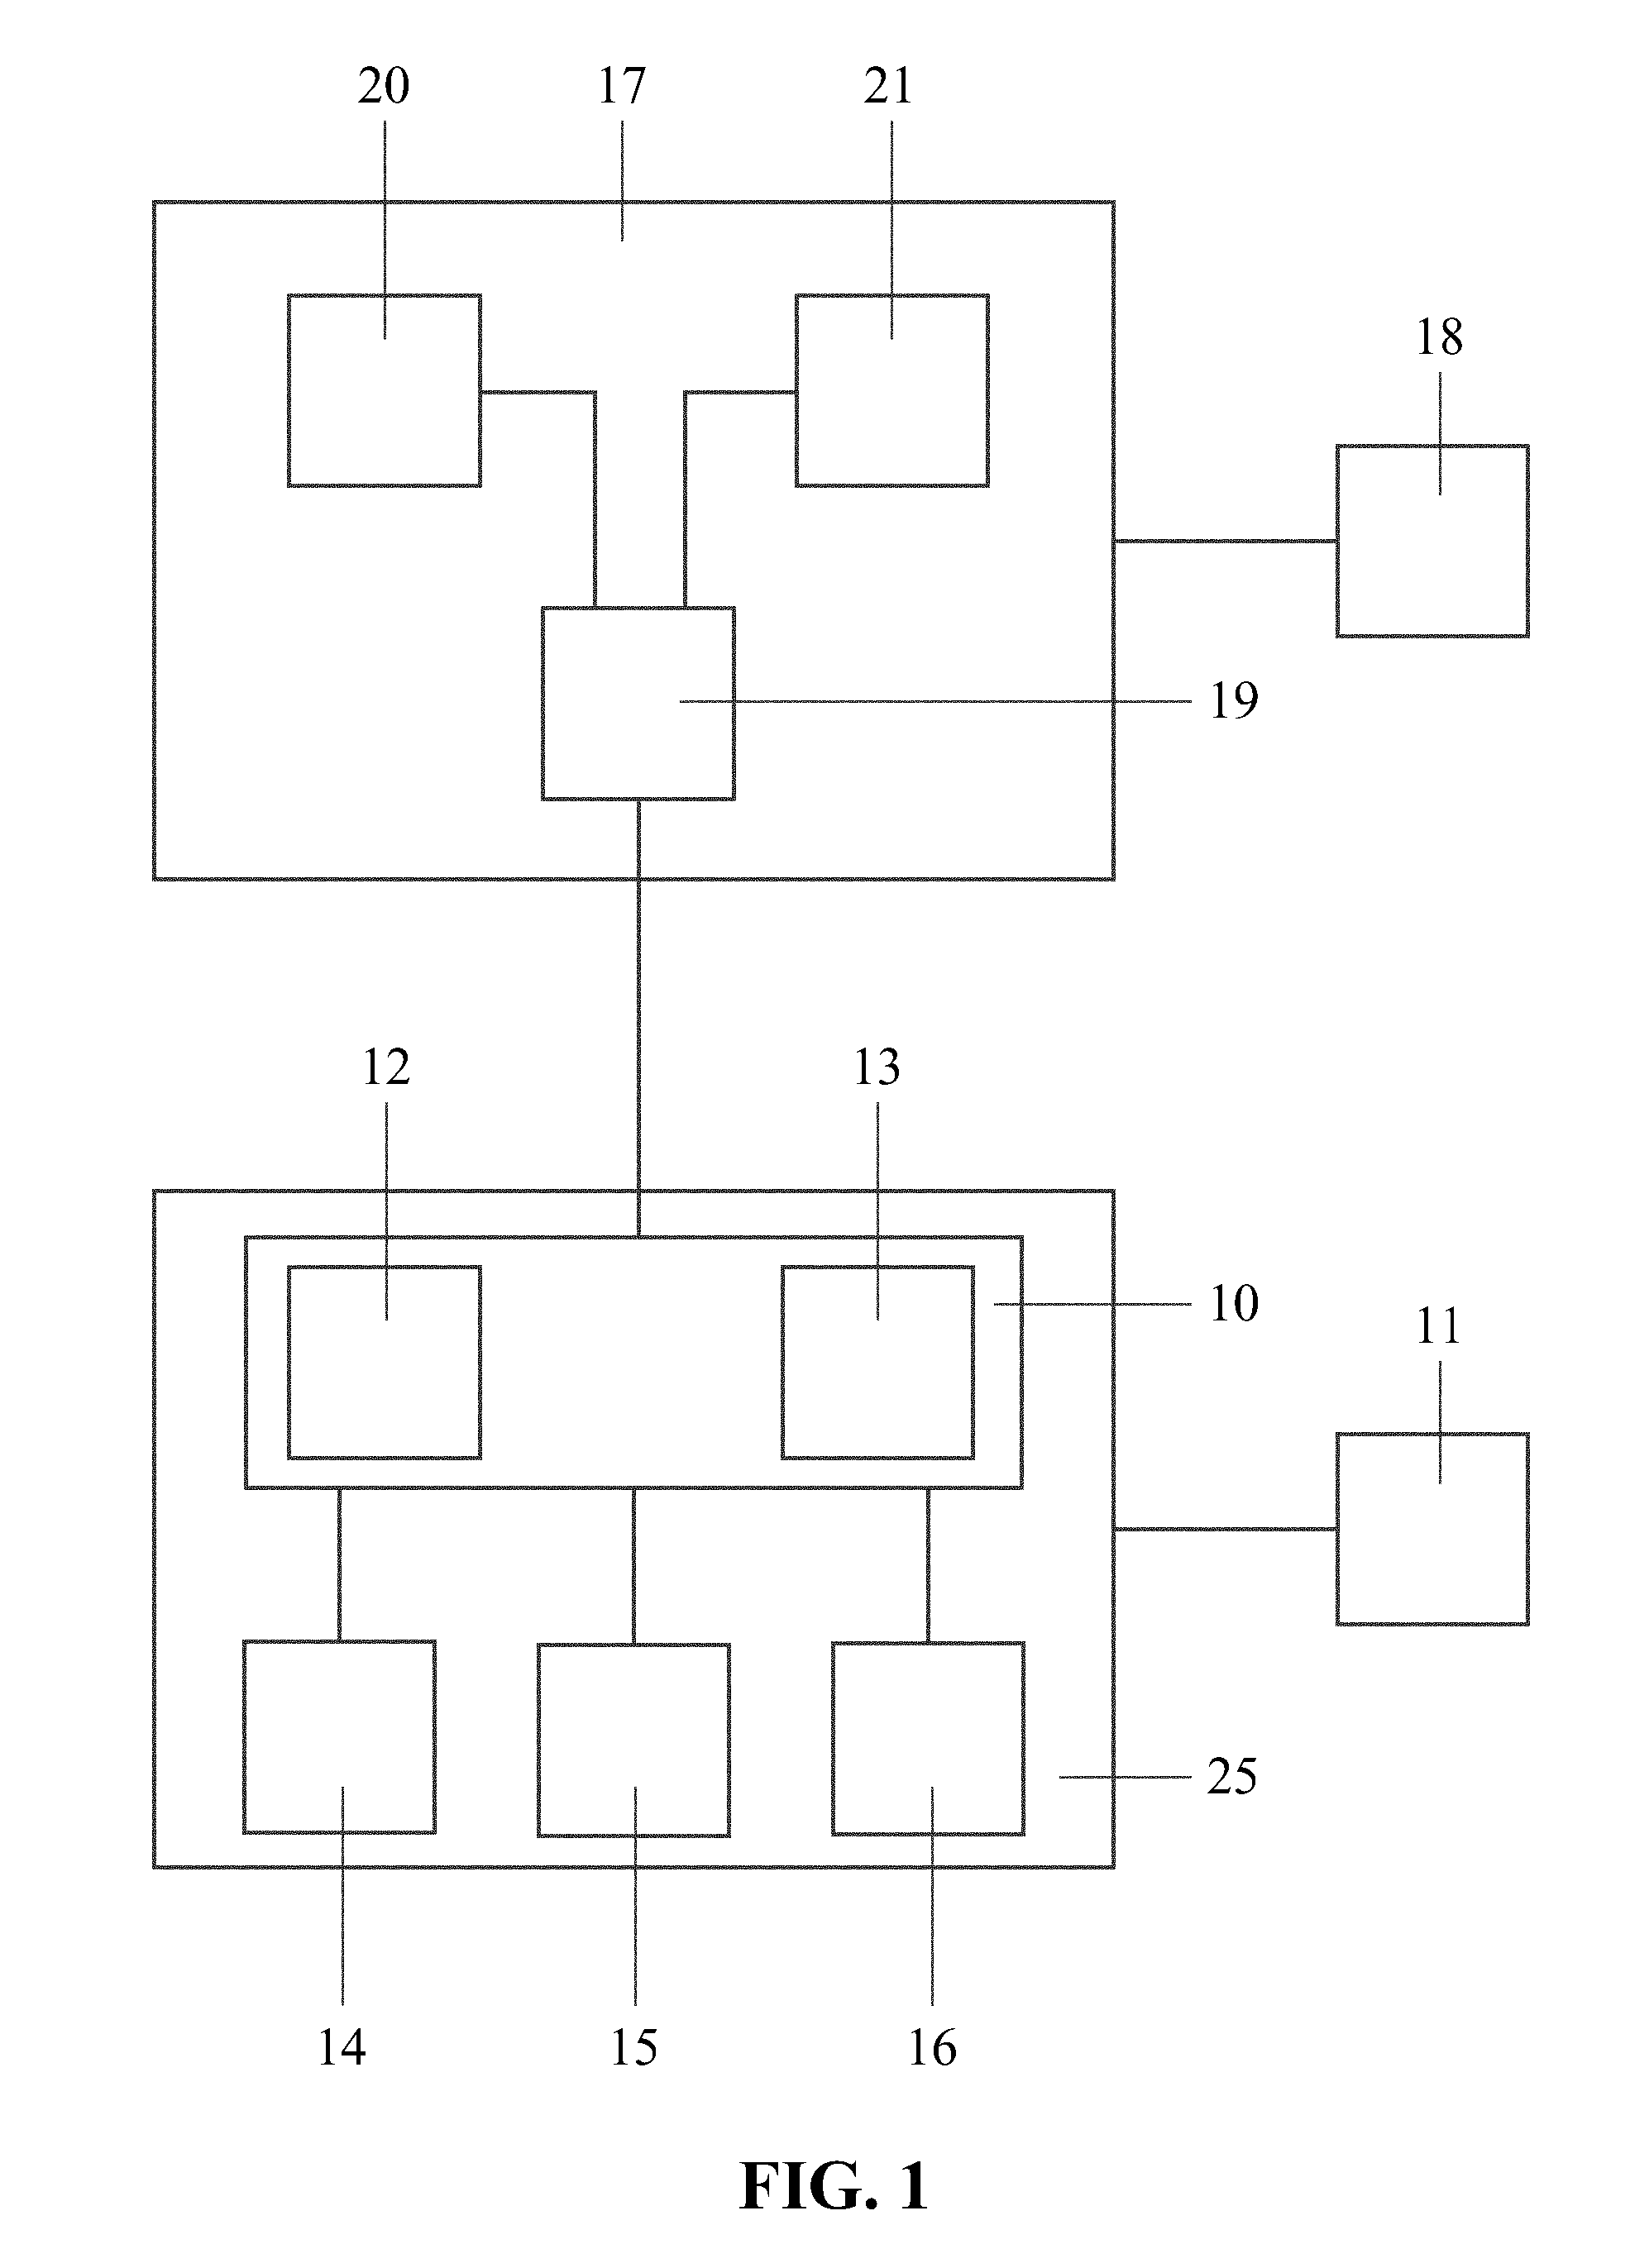 Secure data capture apparatus and method